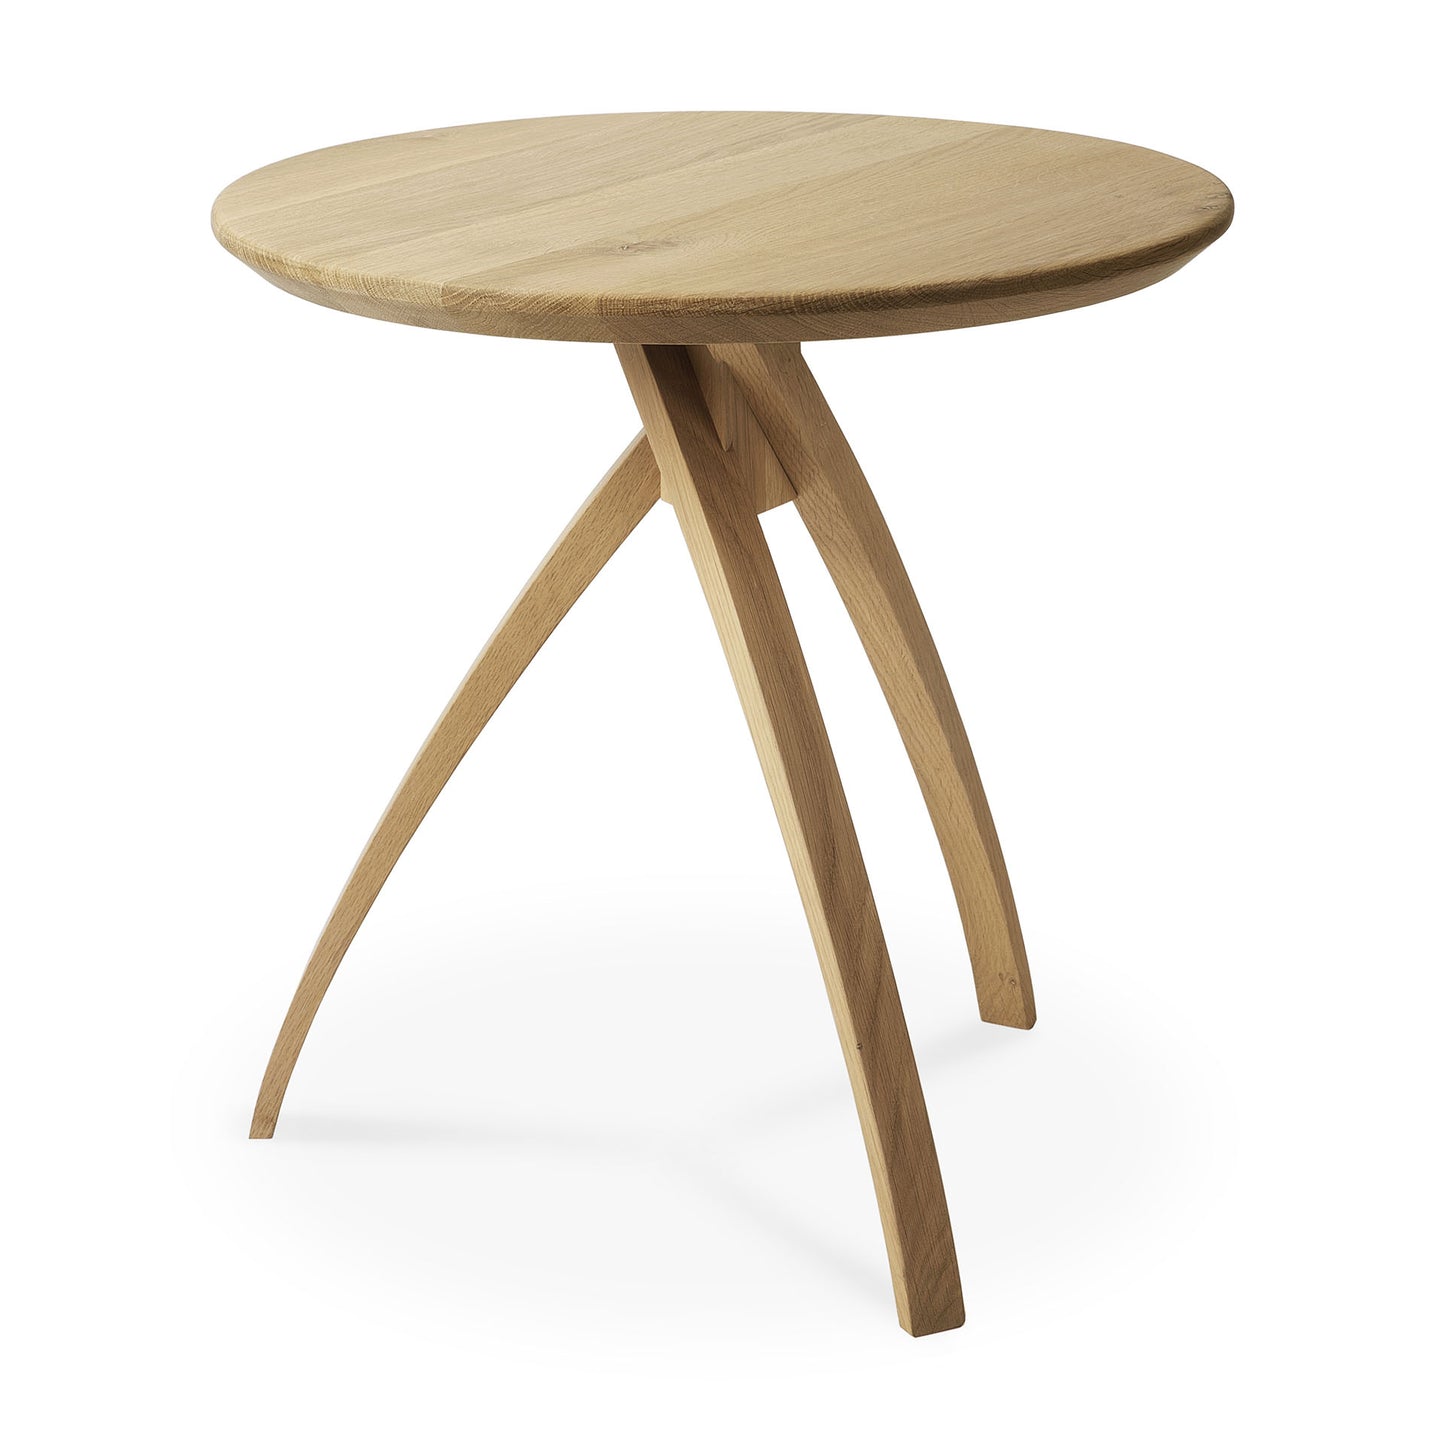 Ethnicraft Oak Twist Side Tables available from Make Your House A Home, Bendigo, Victoria, Australia